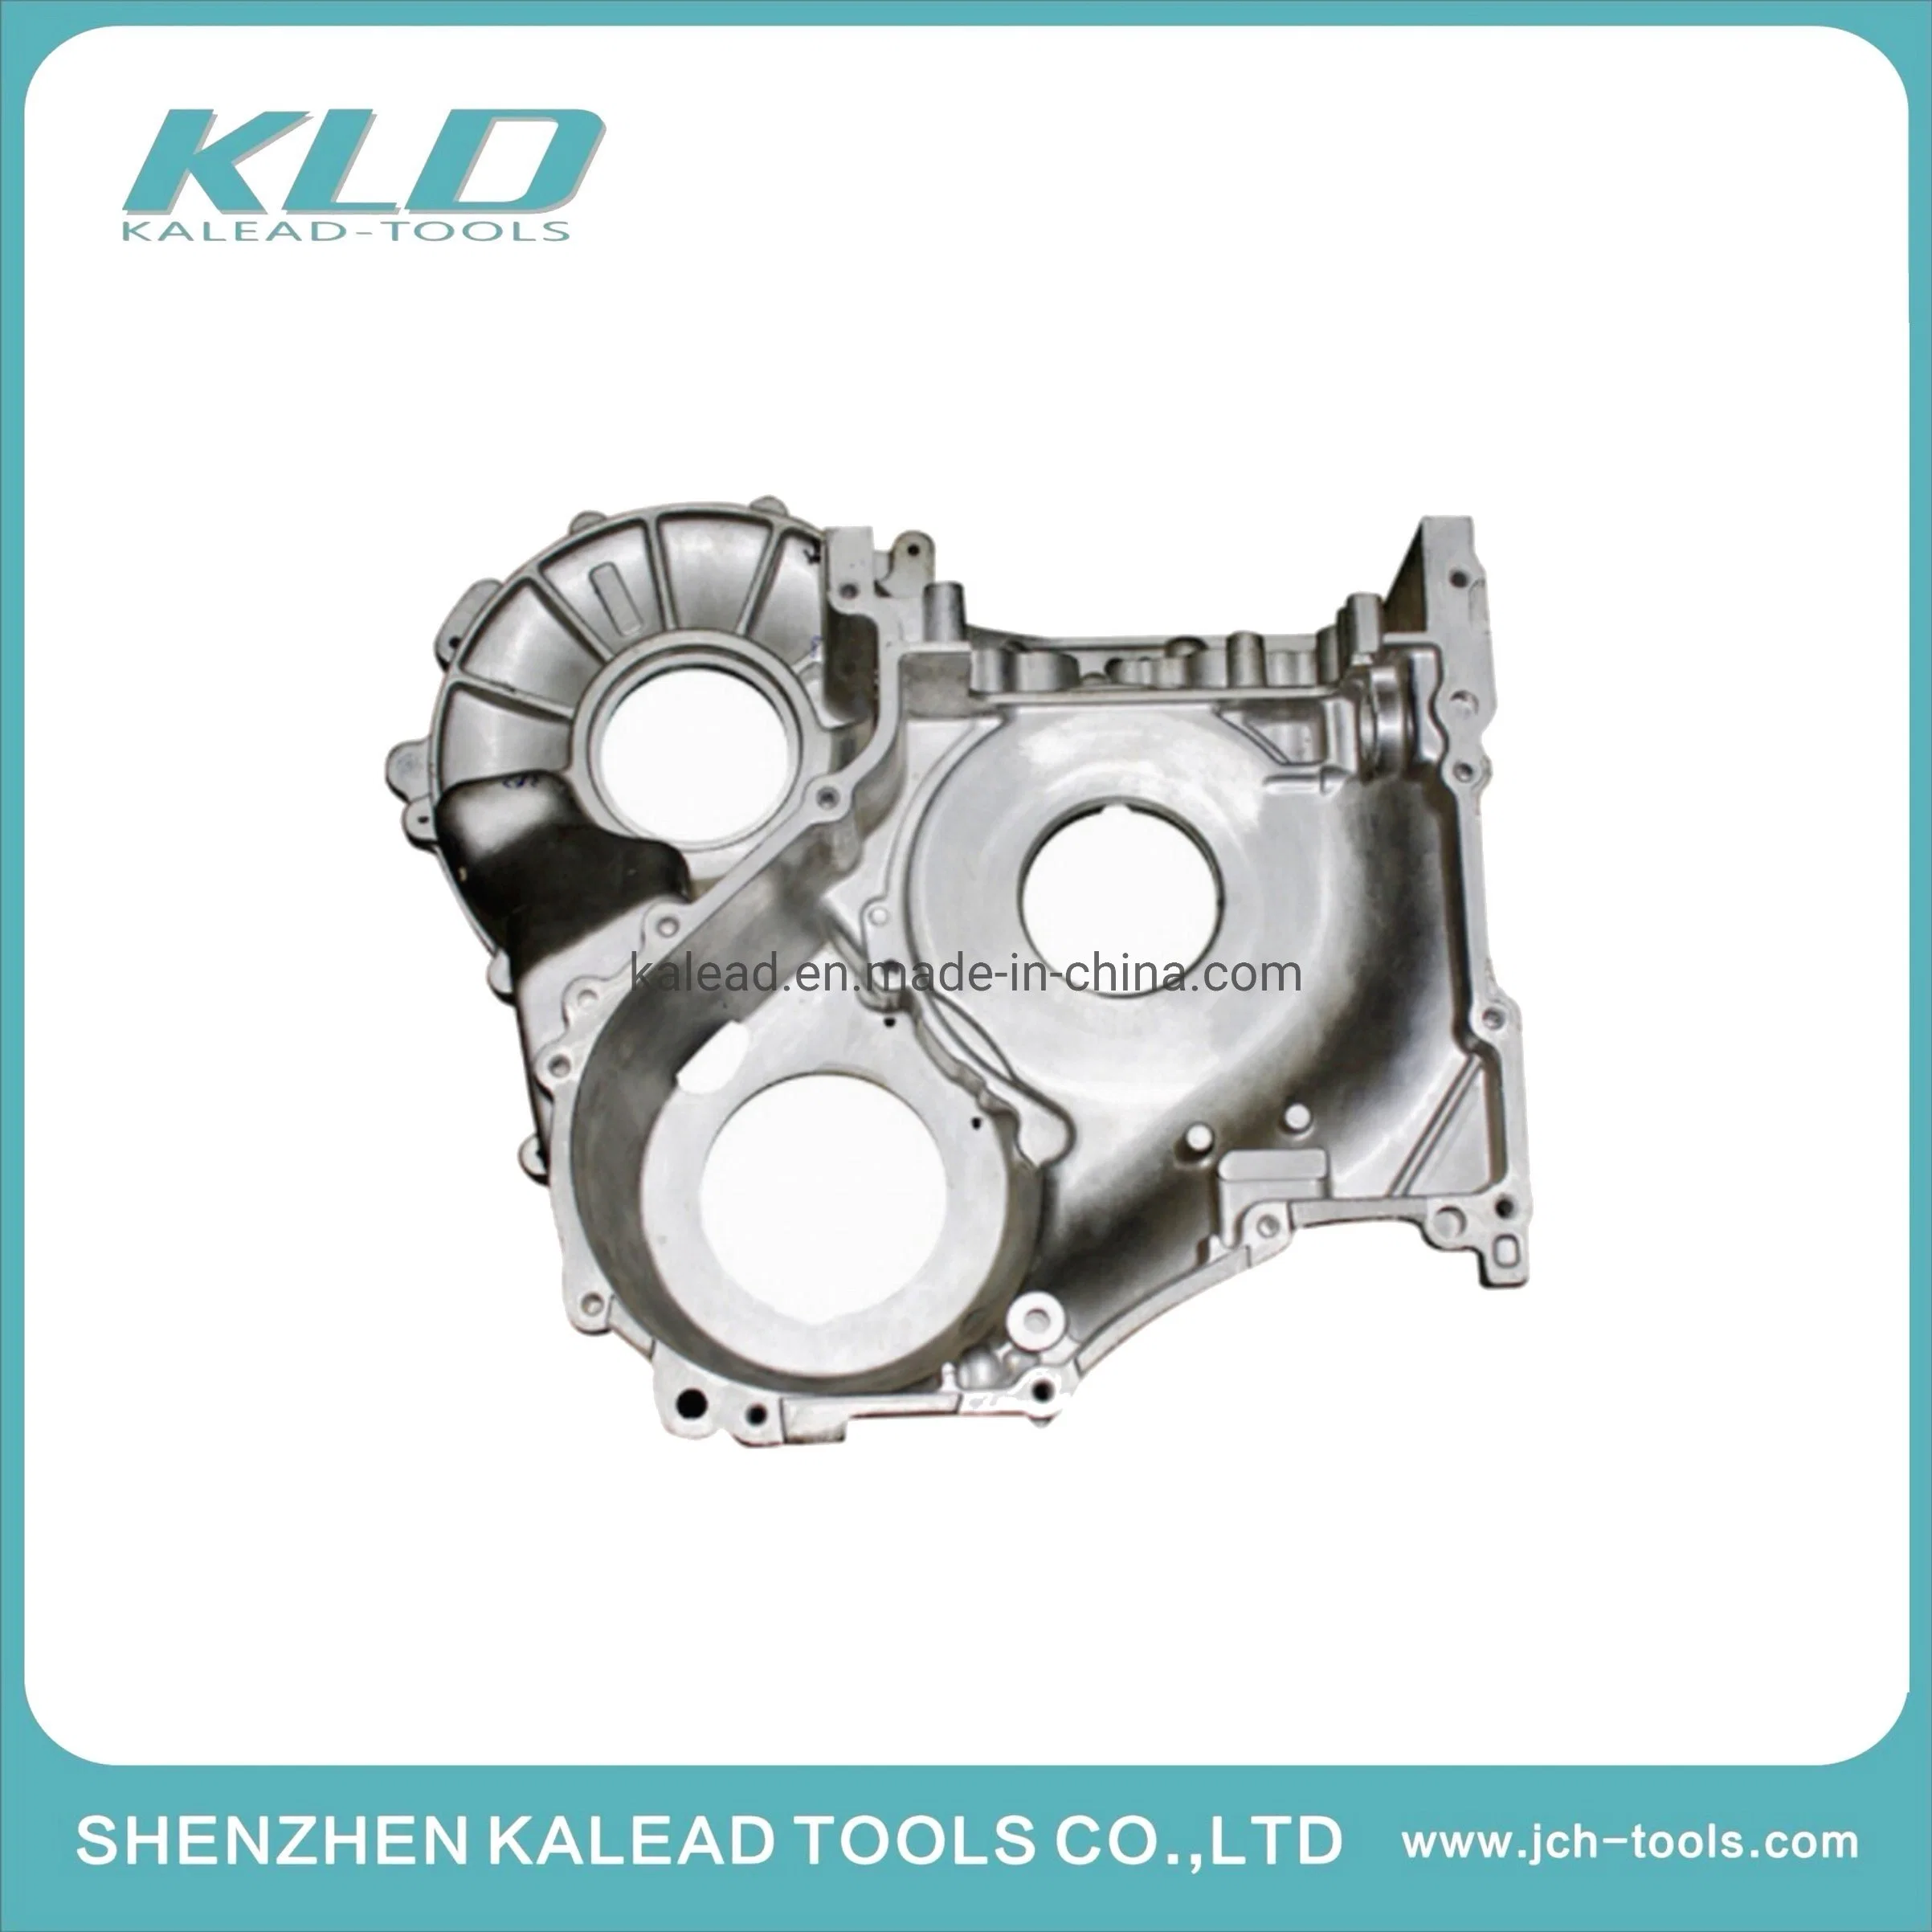 Customized Stainless Steel Precision Die Mould Blank Casting in Lost Wax Investment Ductile Iron Aluminum Zinc Alloy Casting for Mechining Parts Auto Casting